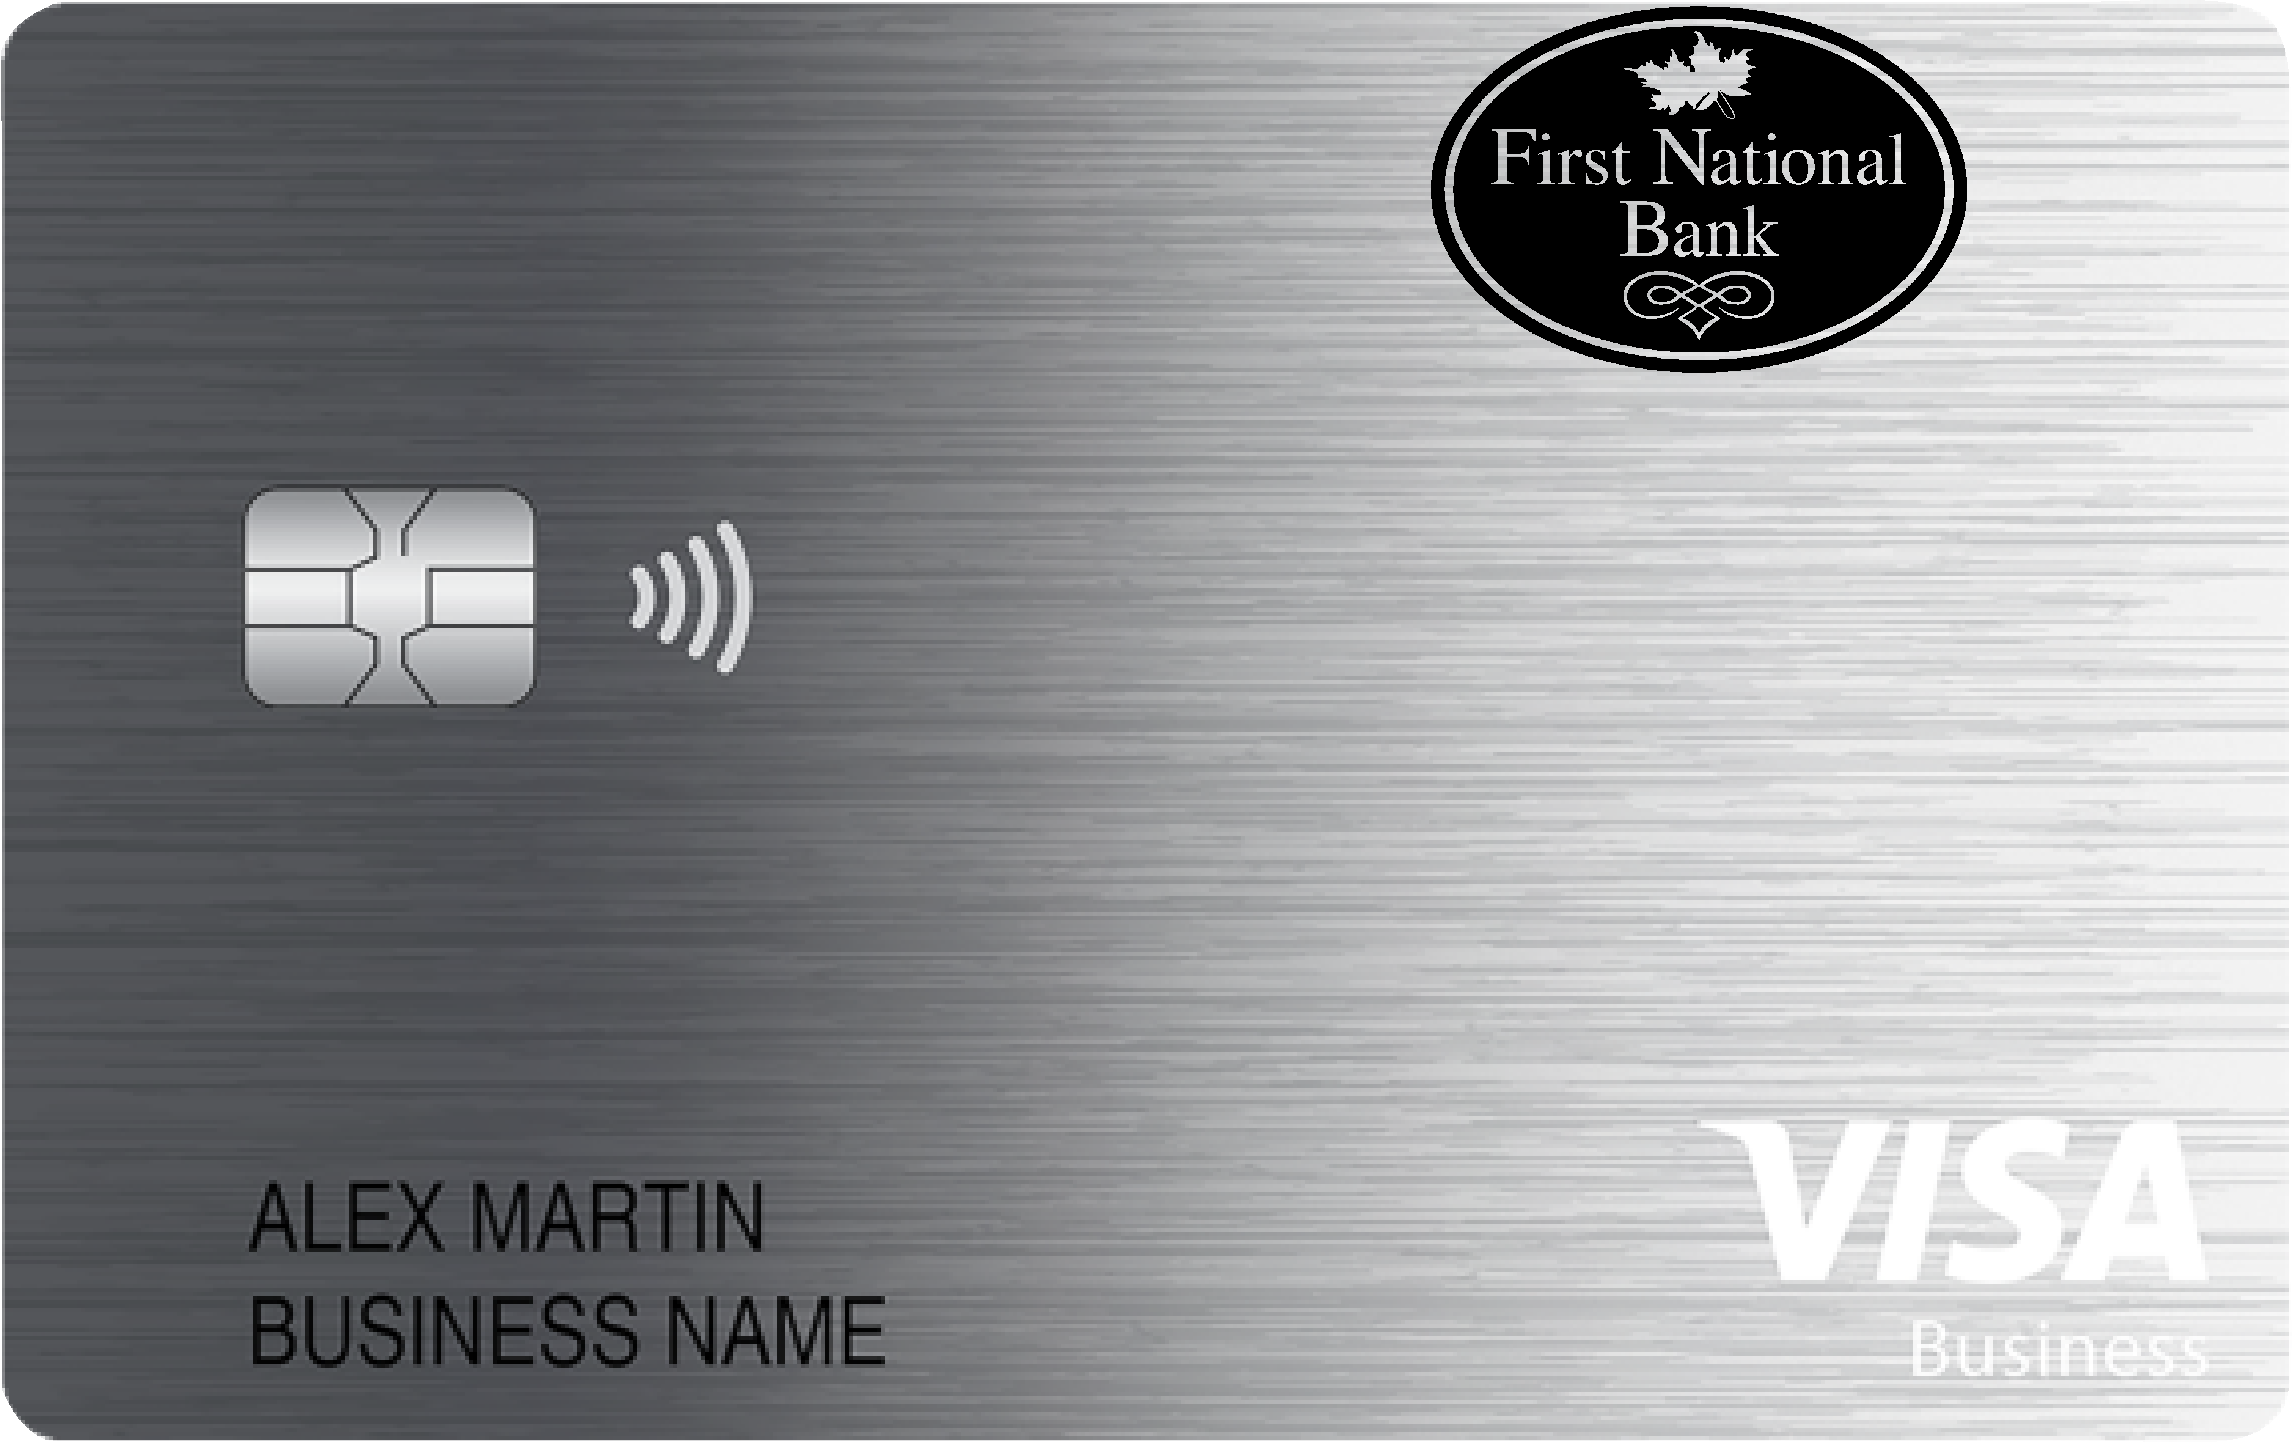 First National Bank Of Grayson Business Cash Preferred Card